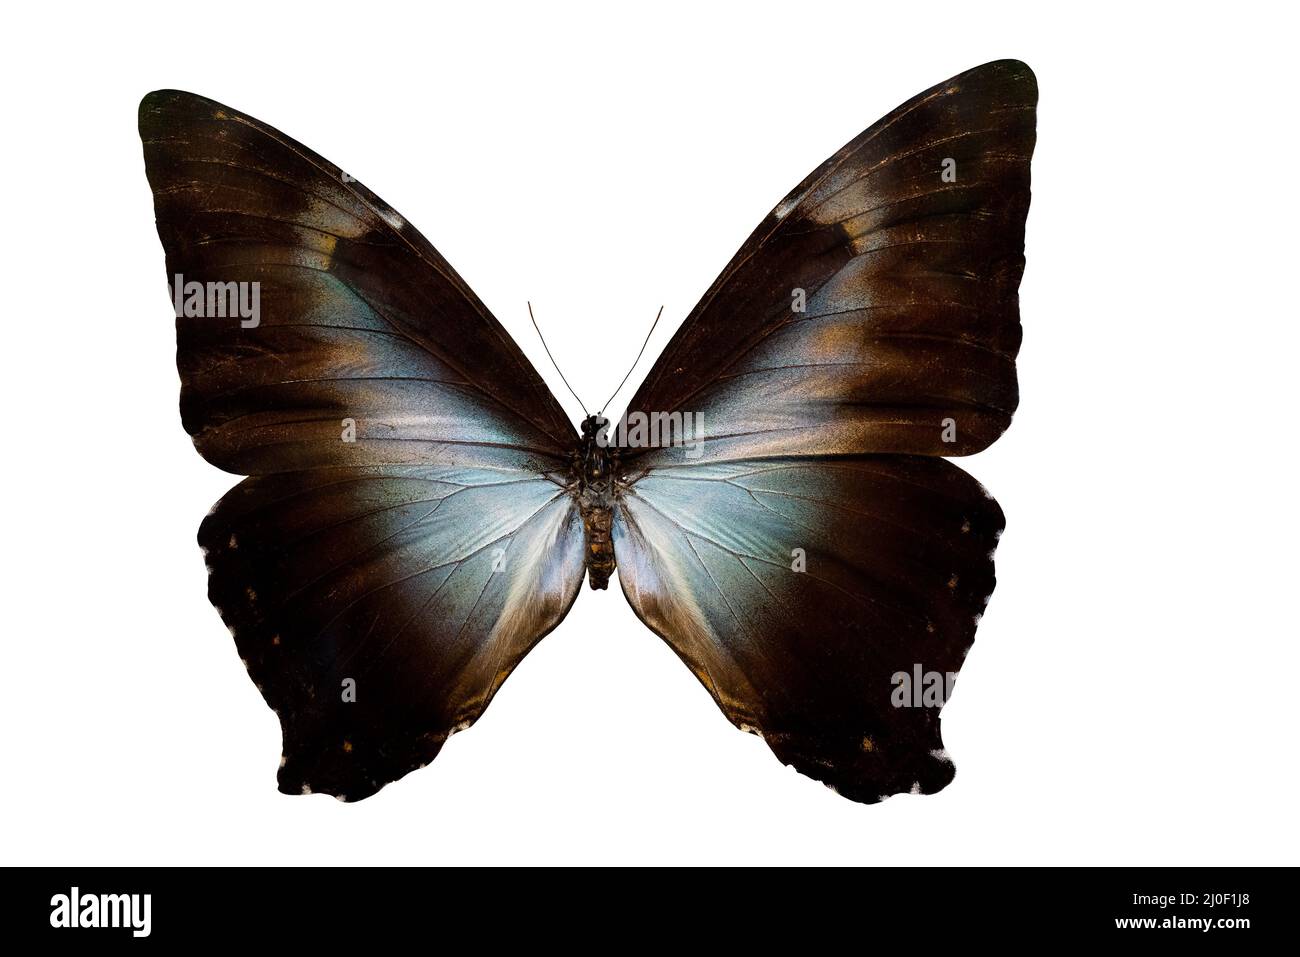 Morpho butterfly Neotropic butterfly. Wings and antennae of a flying insect. The world of wildlife. Stock Photo